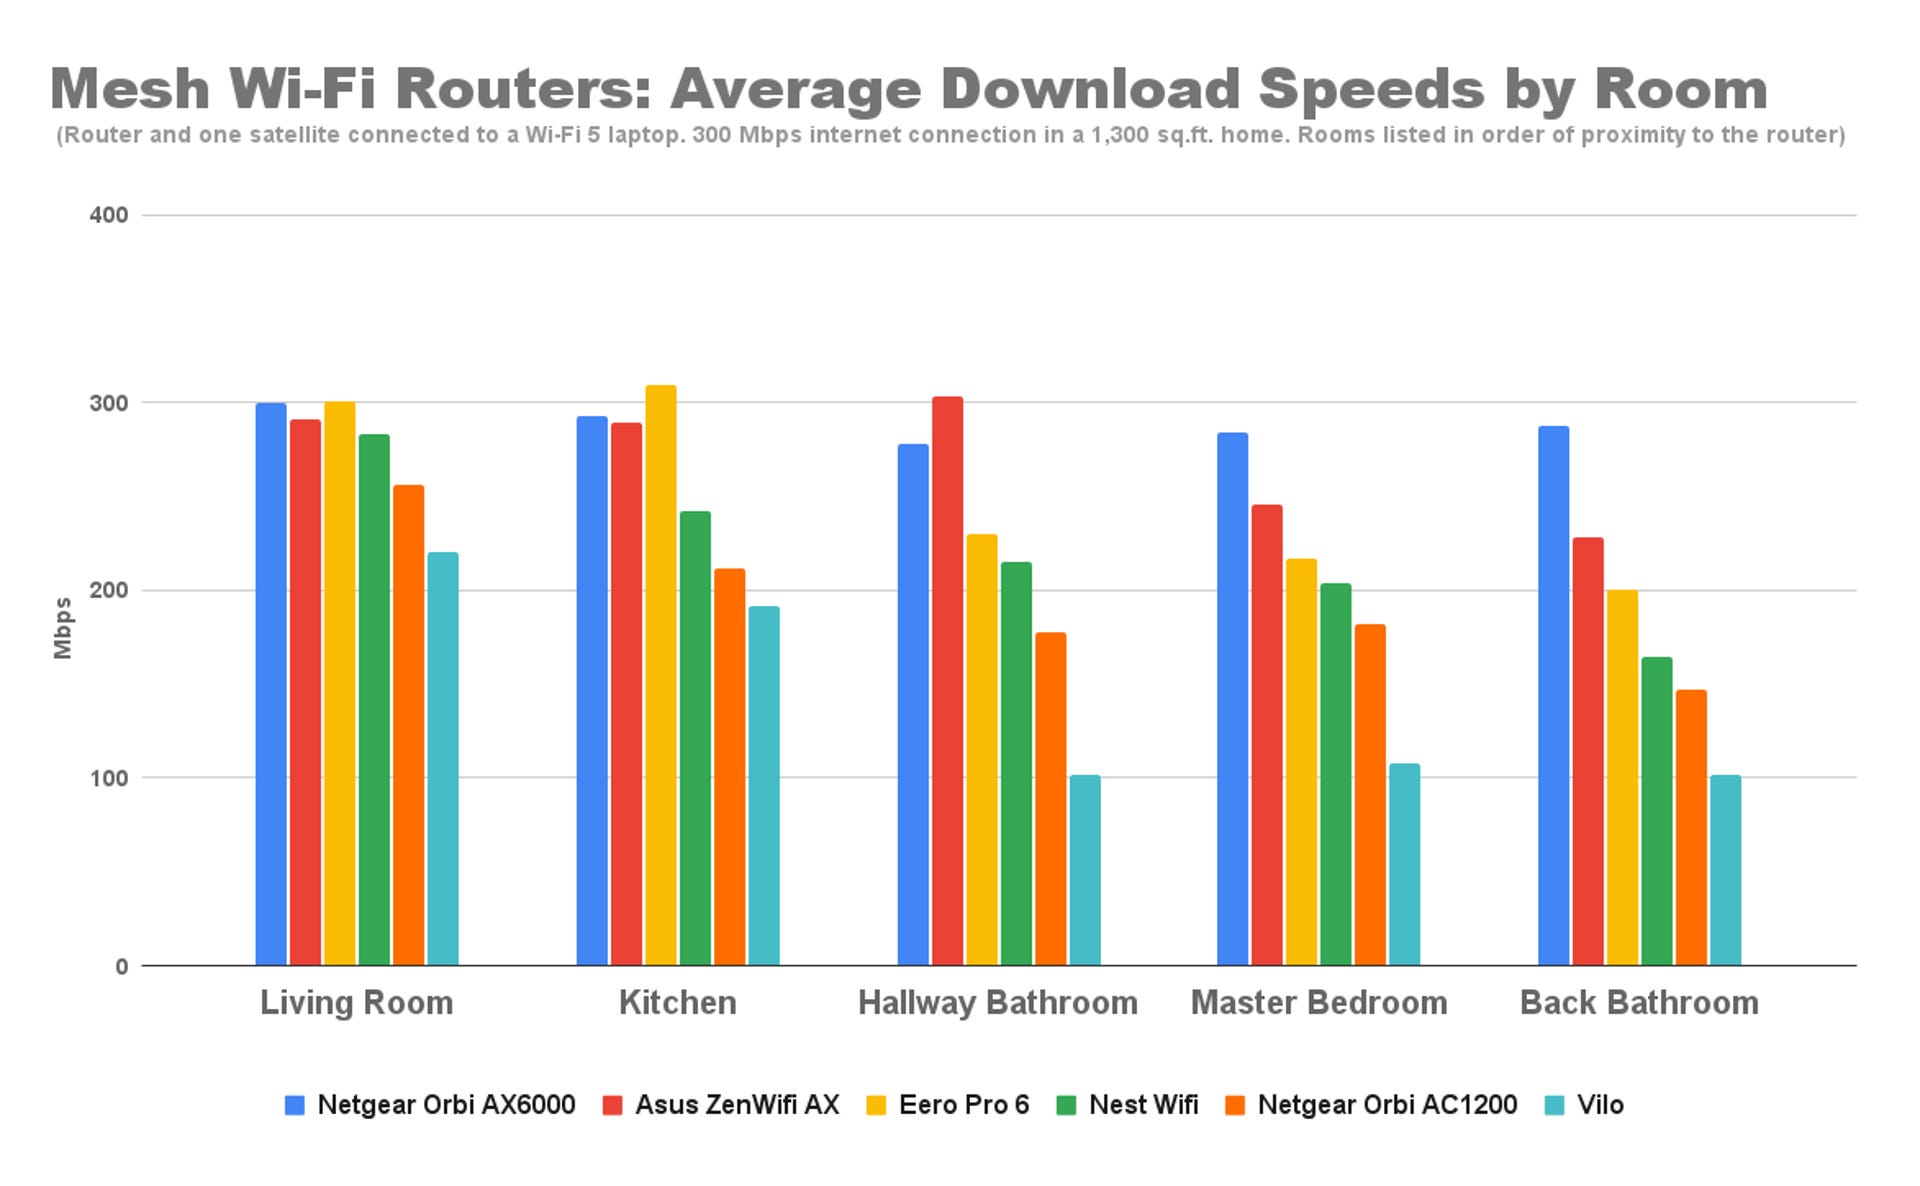 mesh-wi-fi-routers-average-download-speeds-by-room-6.png